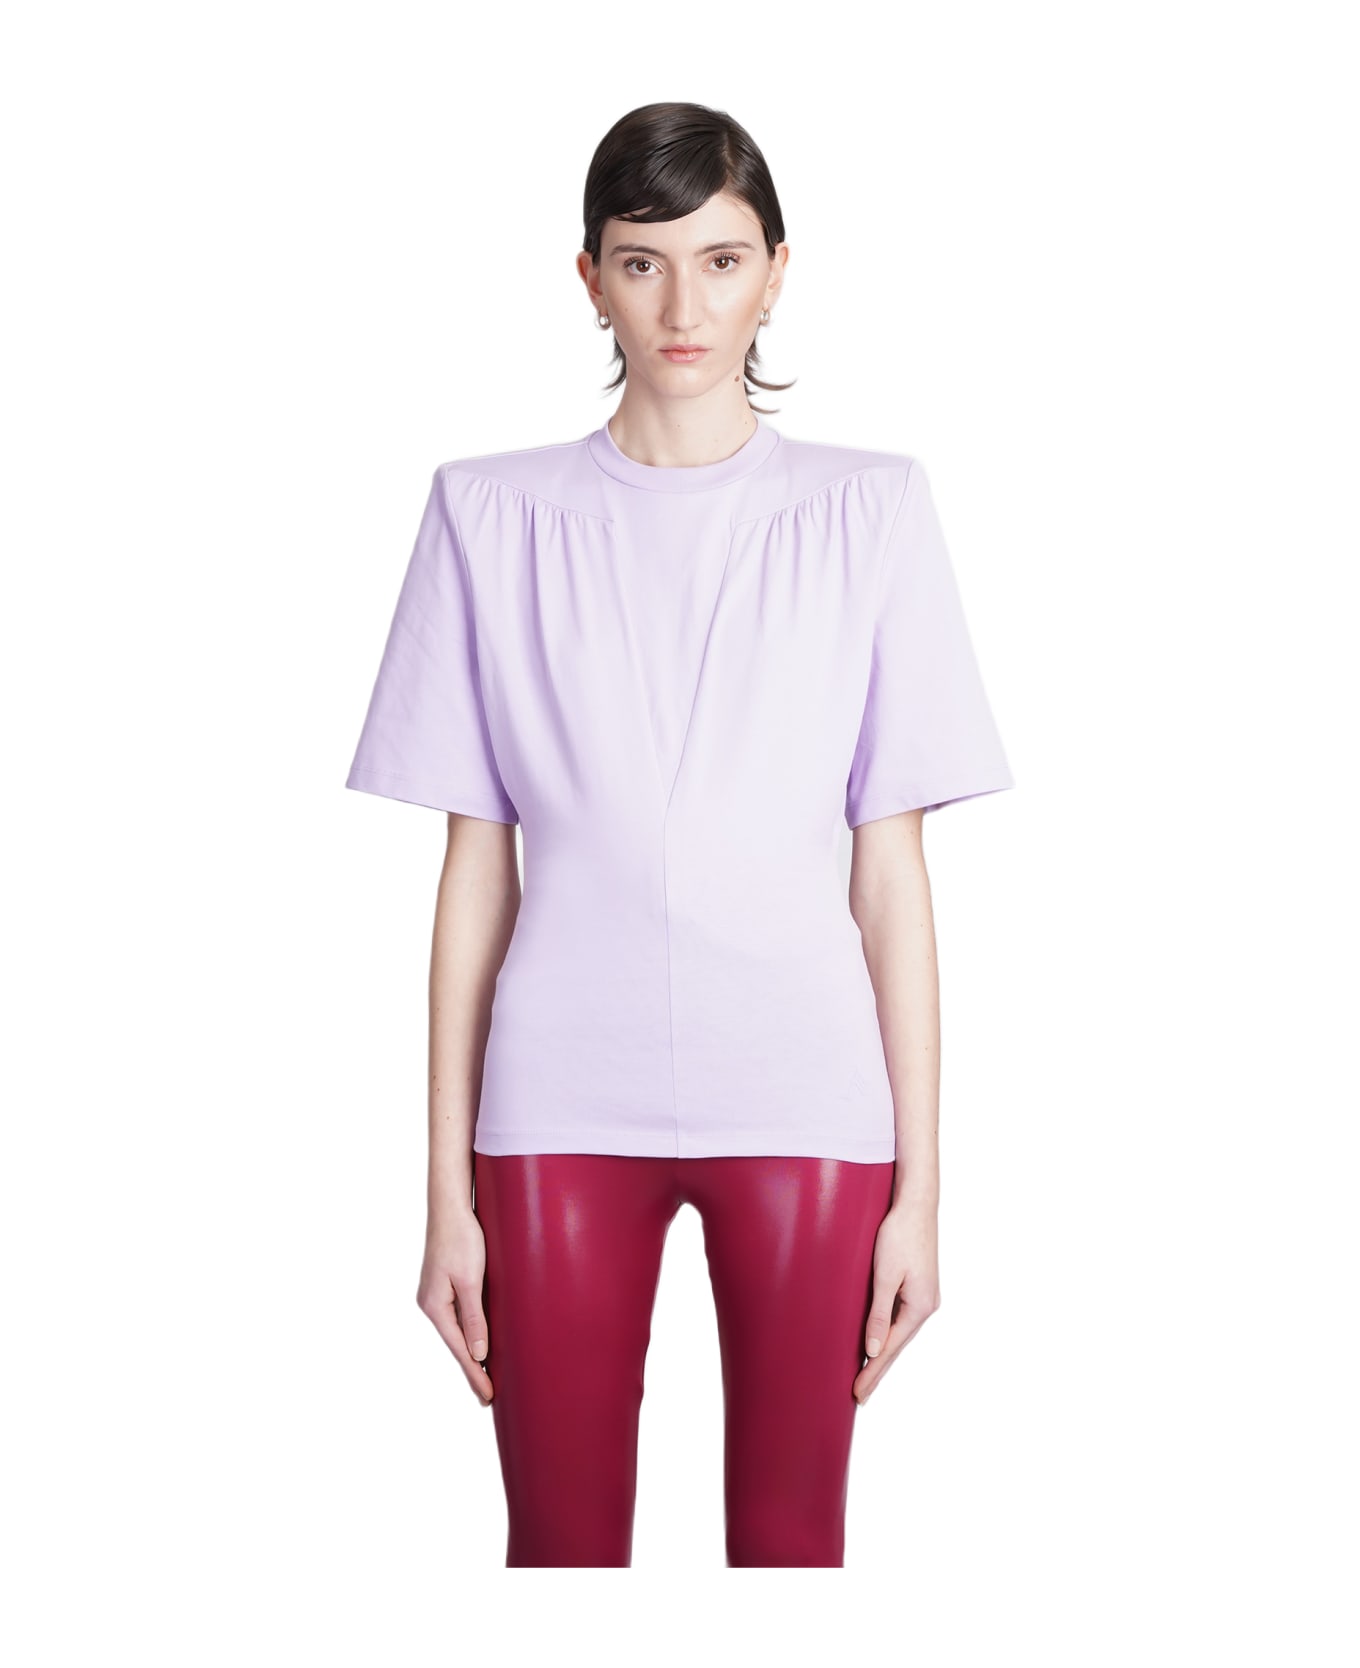 The Attico T-shirt 'jewel' With Cut-out Details